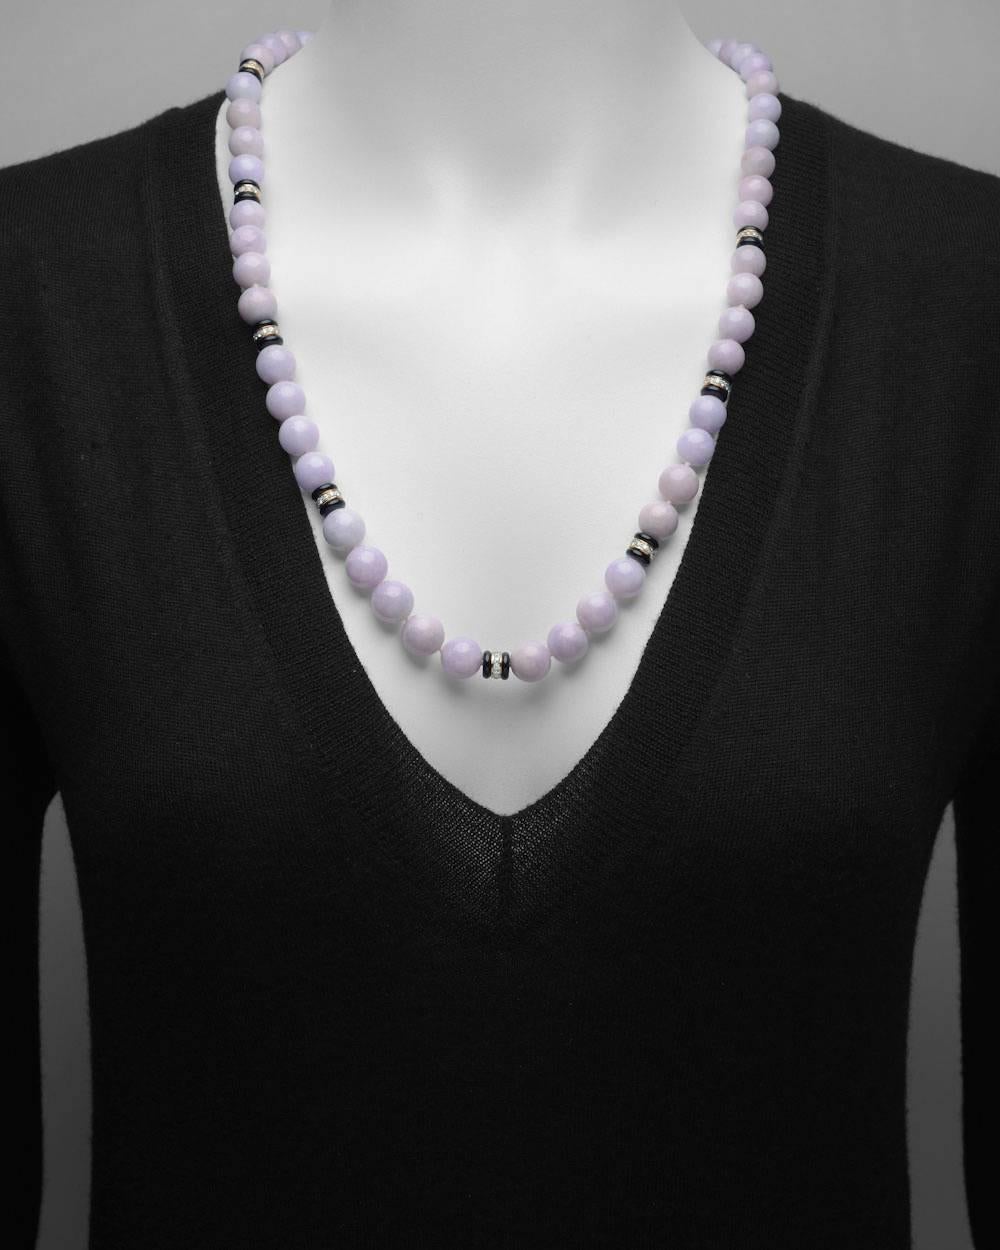 Bead necklace, composed of 57 slightly graduated lavender jade beads, ranging from approximately 10 to 13mm in diameter, with 8 black onyx and diamond-set rondelles in 18k yellow gold, with a pavé diamond ball clasp, the diamonds altogether